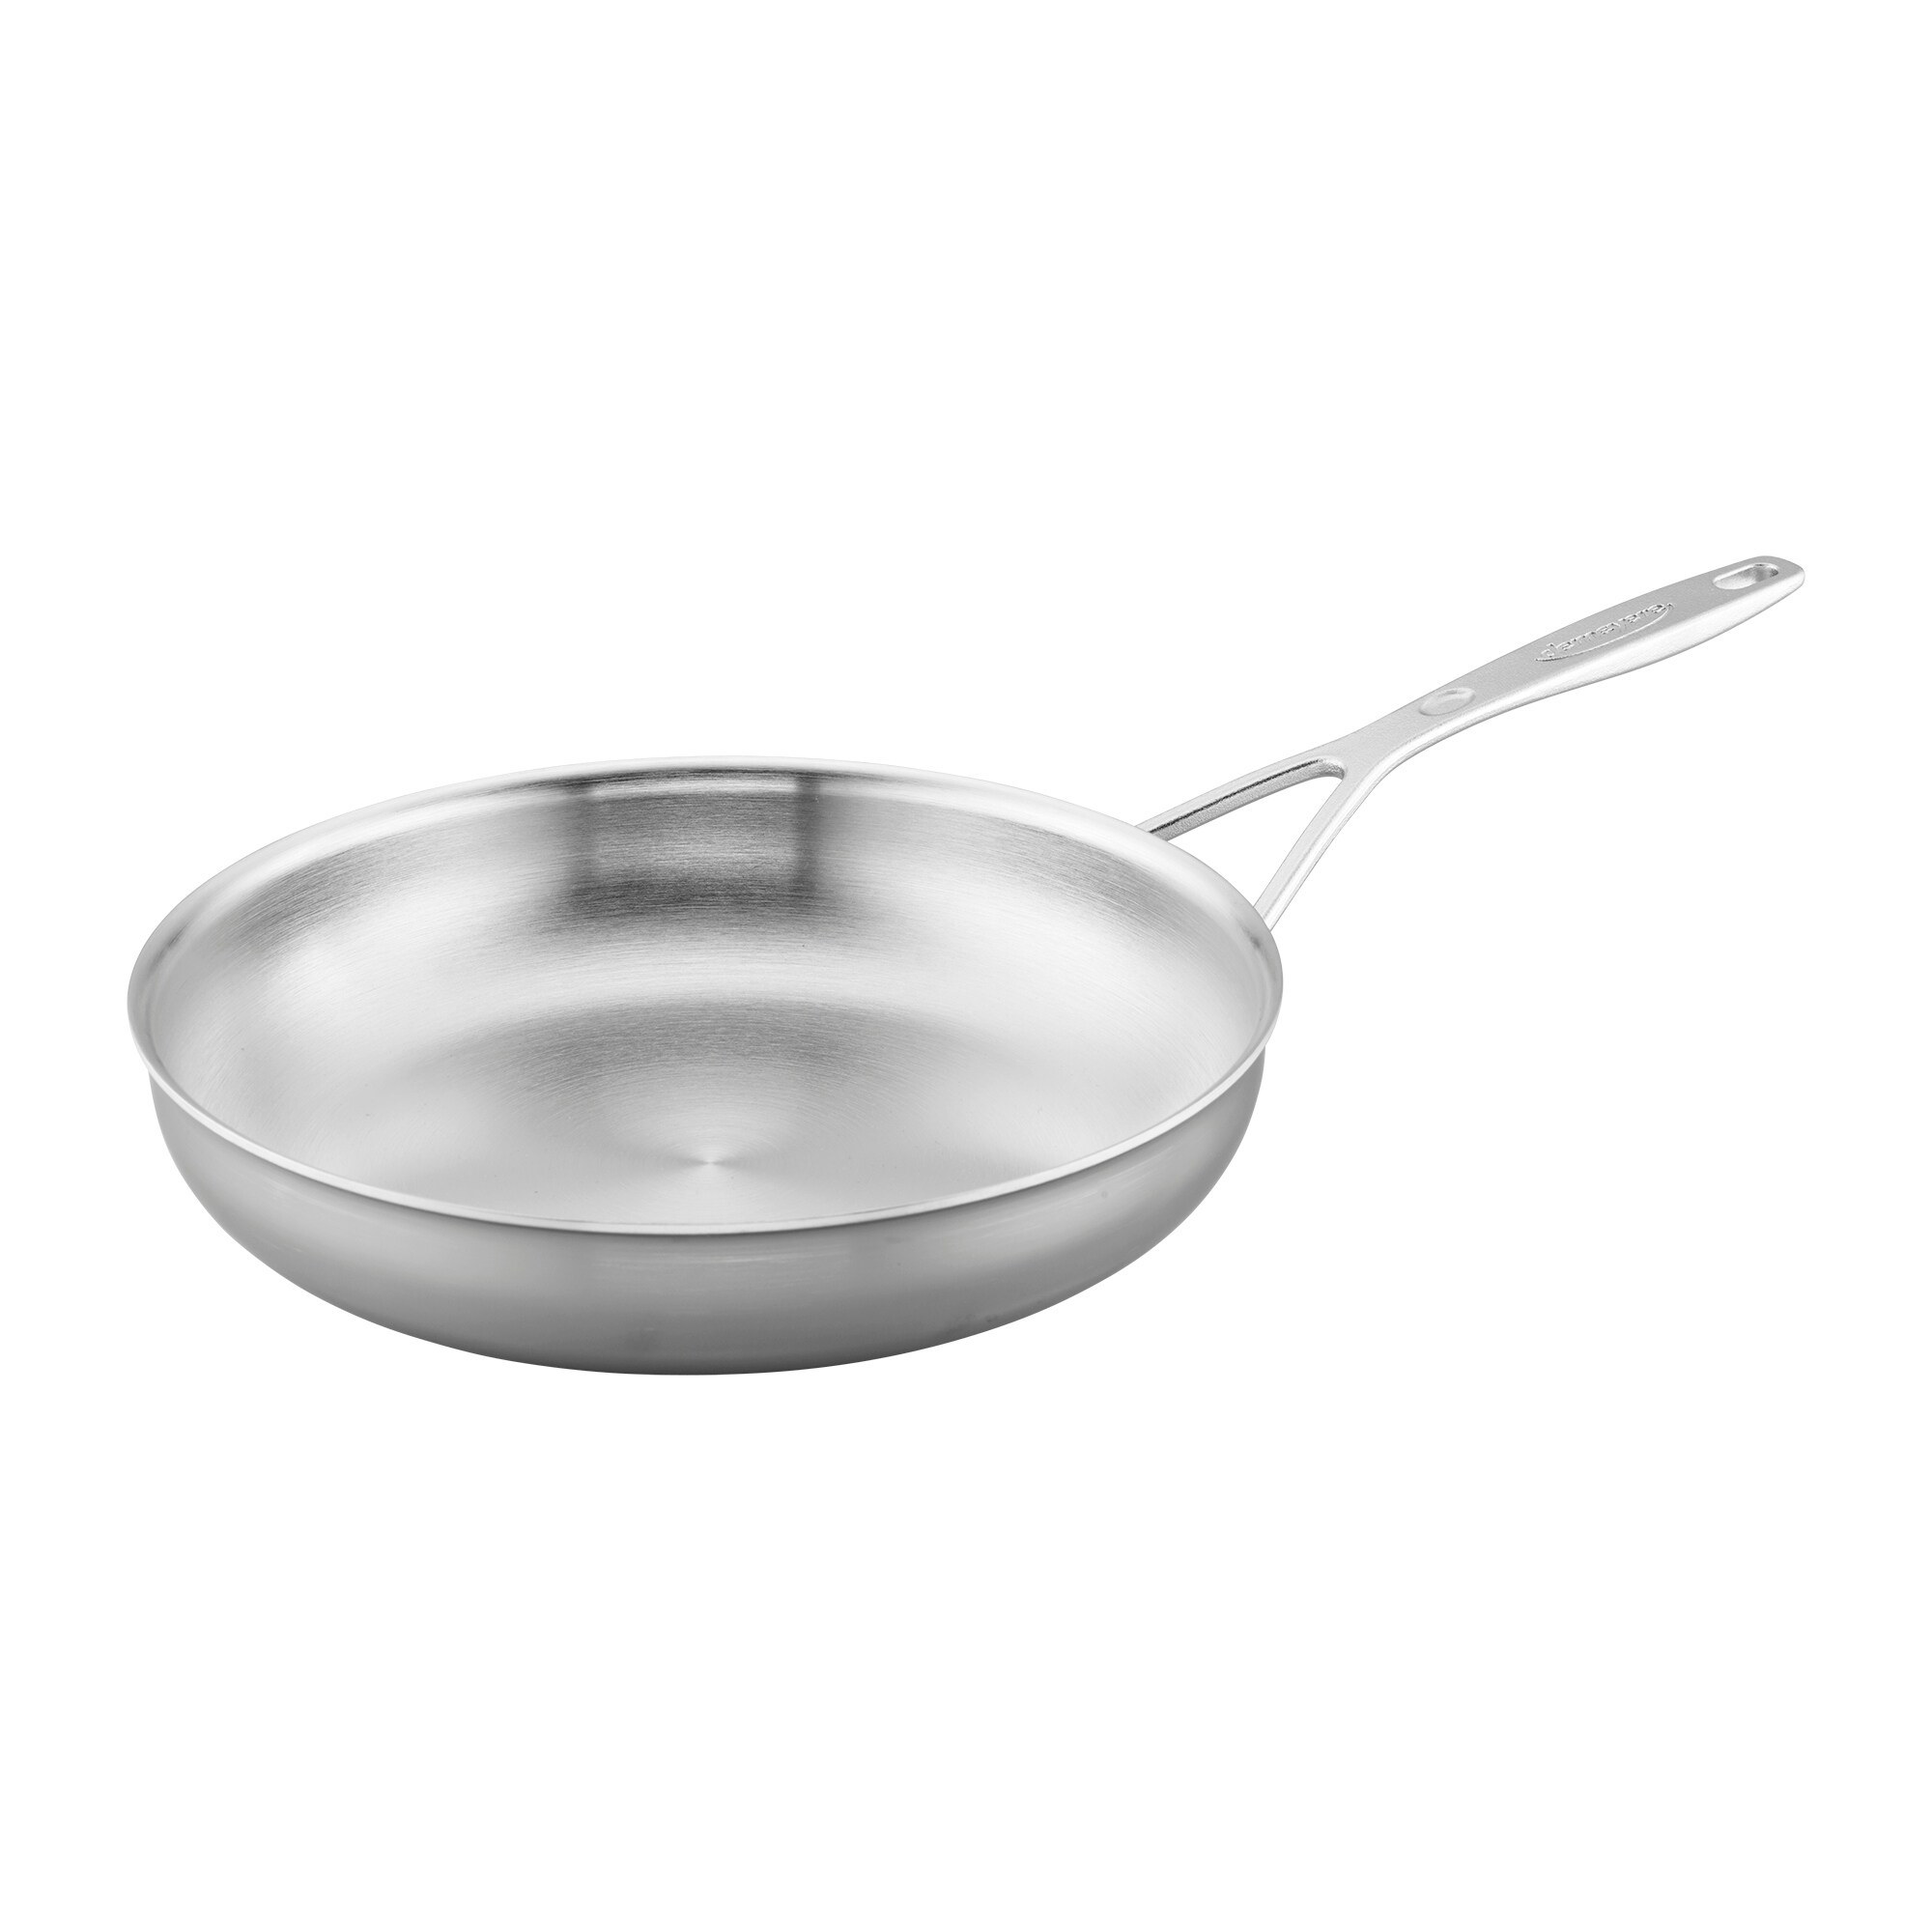 https://ak1.ostkcdn.com/images/products/is/images/direct/12556eeb8571484aeaafb468c312b9f7f6a6c99c/DEMEYERE-Industry-5-Ply-Stainless-Steel-Fry-Pan.jpg